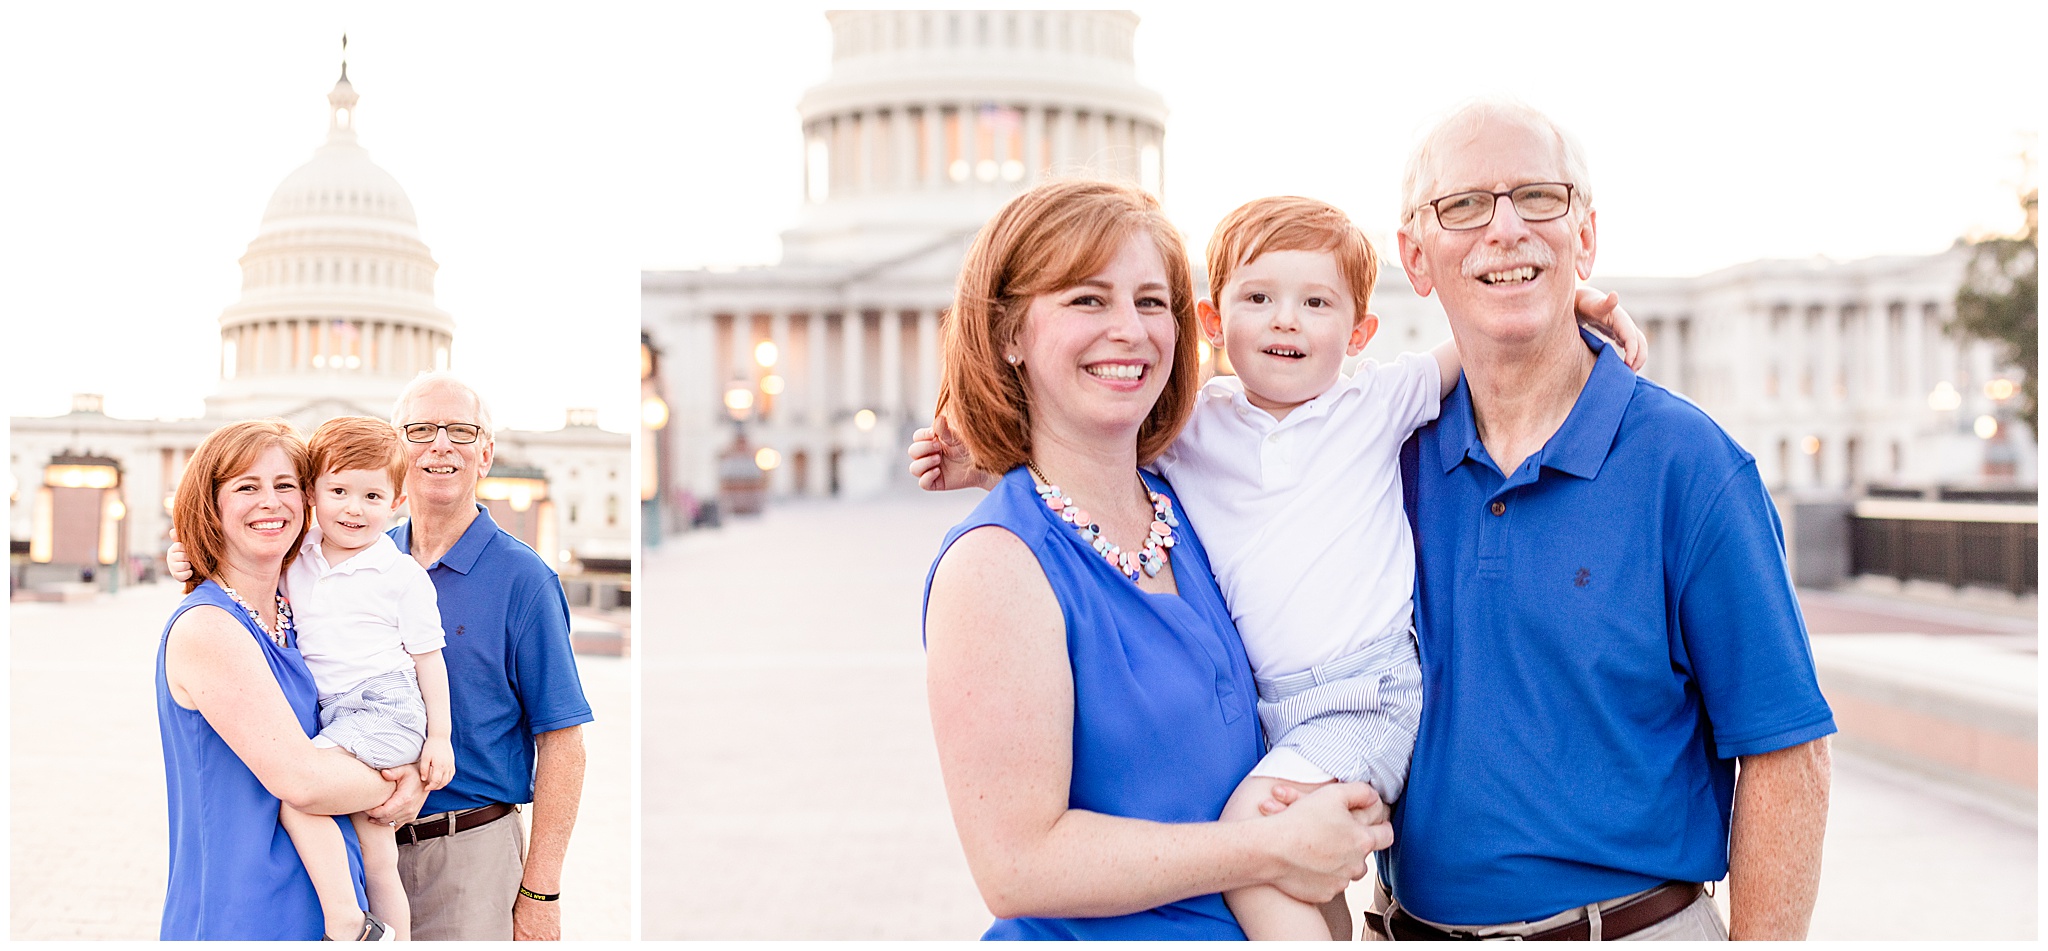 Family Photo Portraits at the Capitol in Washington, DC by Kofmehl Photography